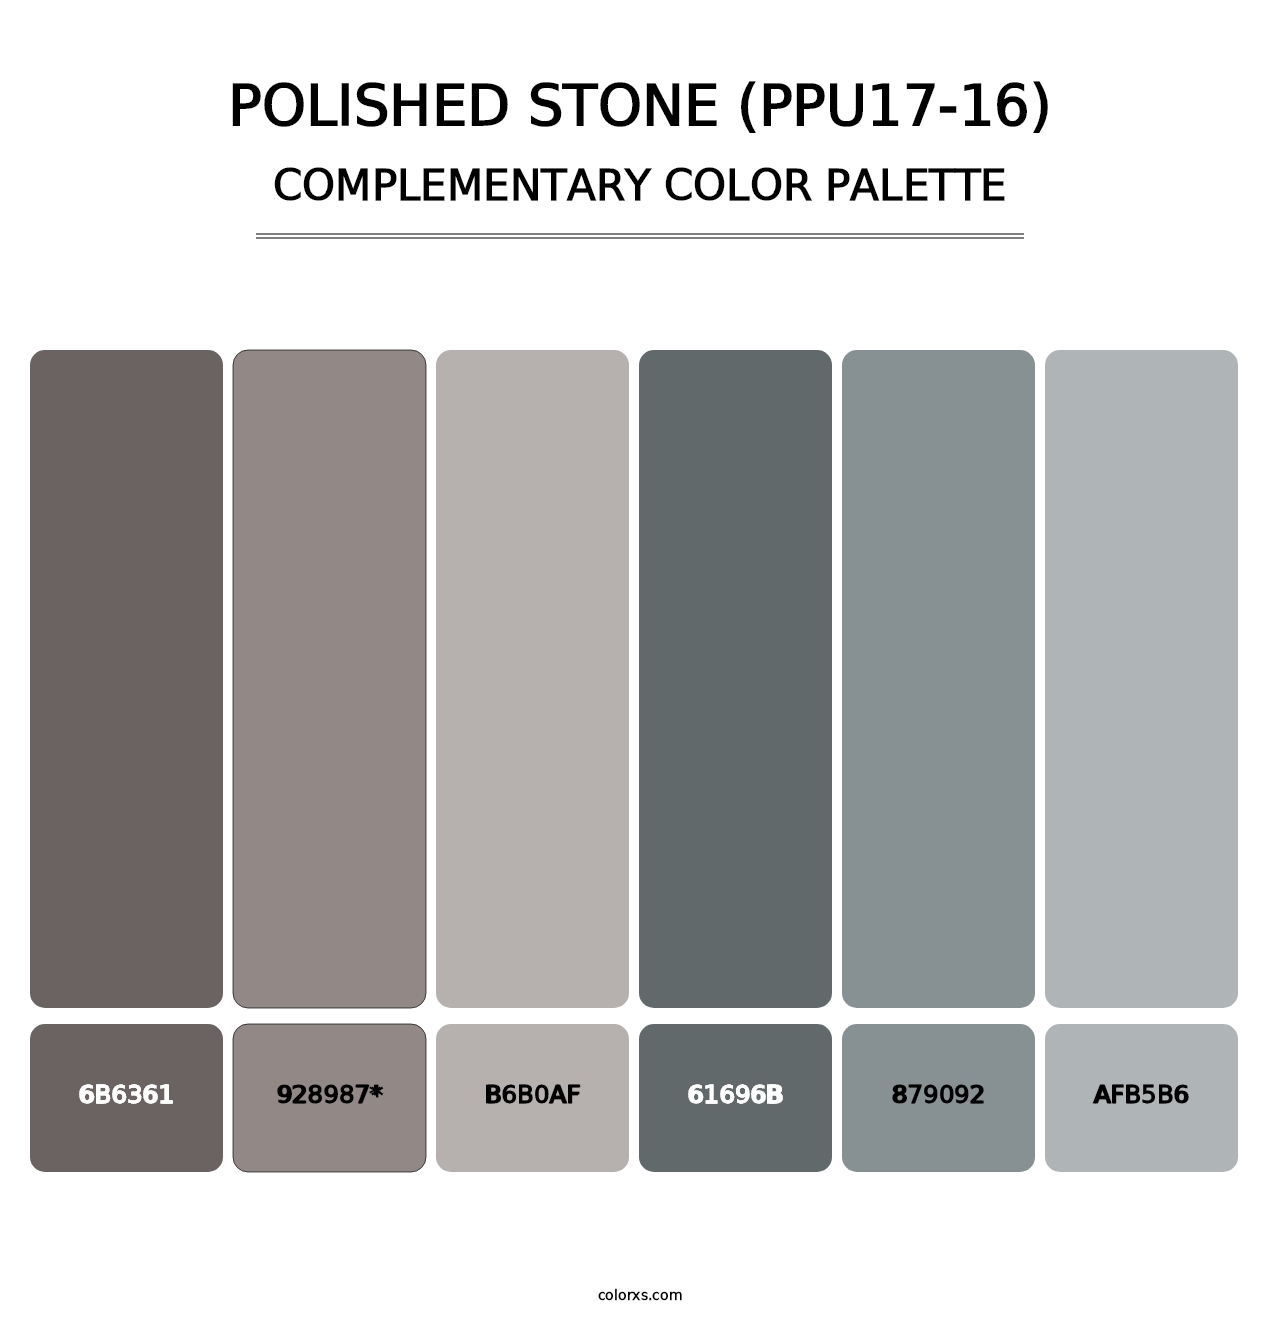 Polished Stone (PPU17-16) - Complementary Color Palette